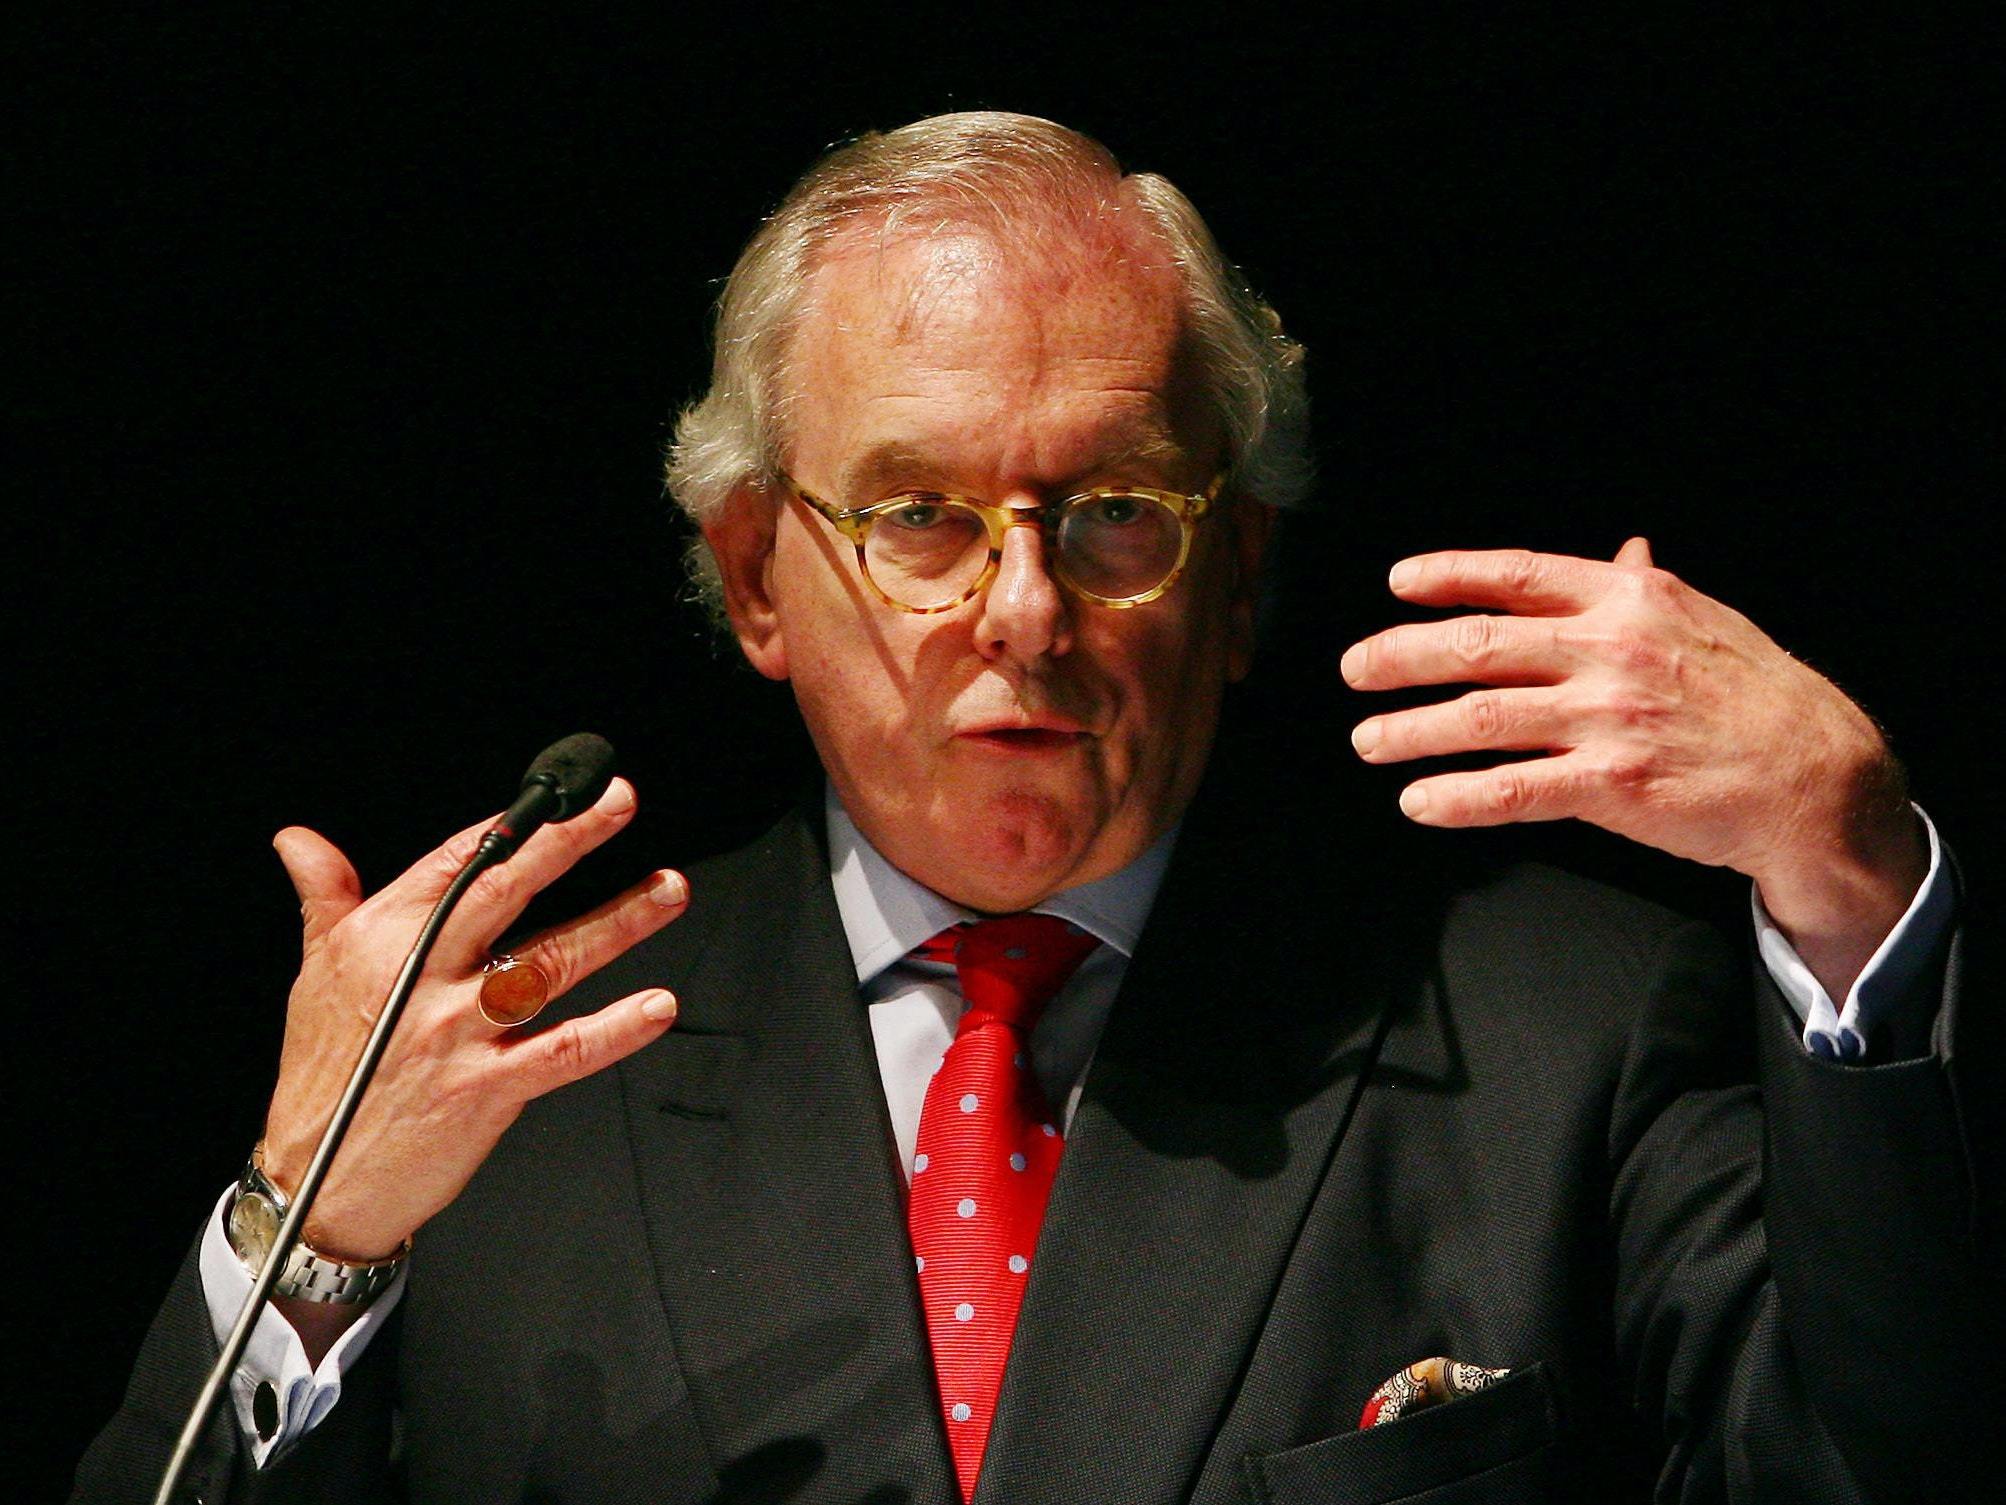 David Starkey has been allowed to empower genocidal racists for too long